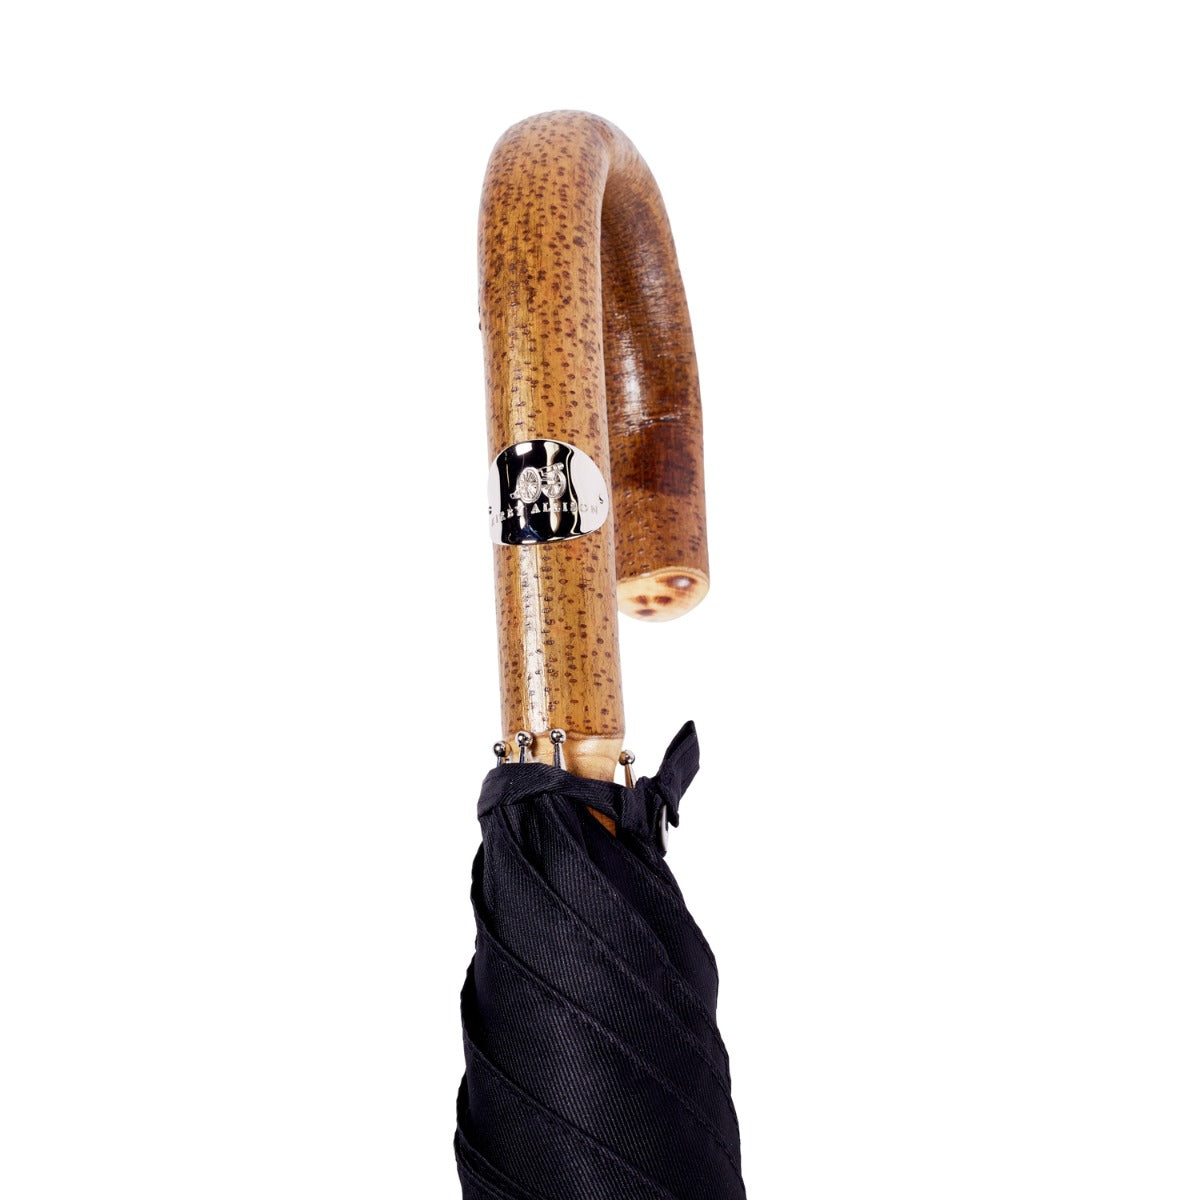 A Palundio Umbrella with Black Twill Canopy from KirbyAllison.com, with a wooden handle.